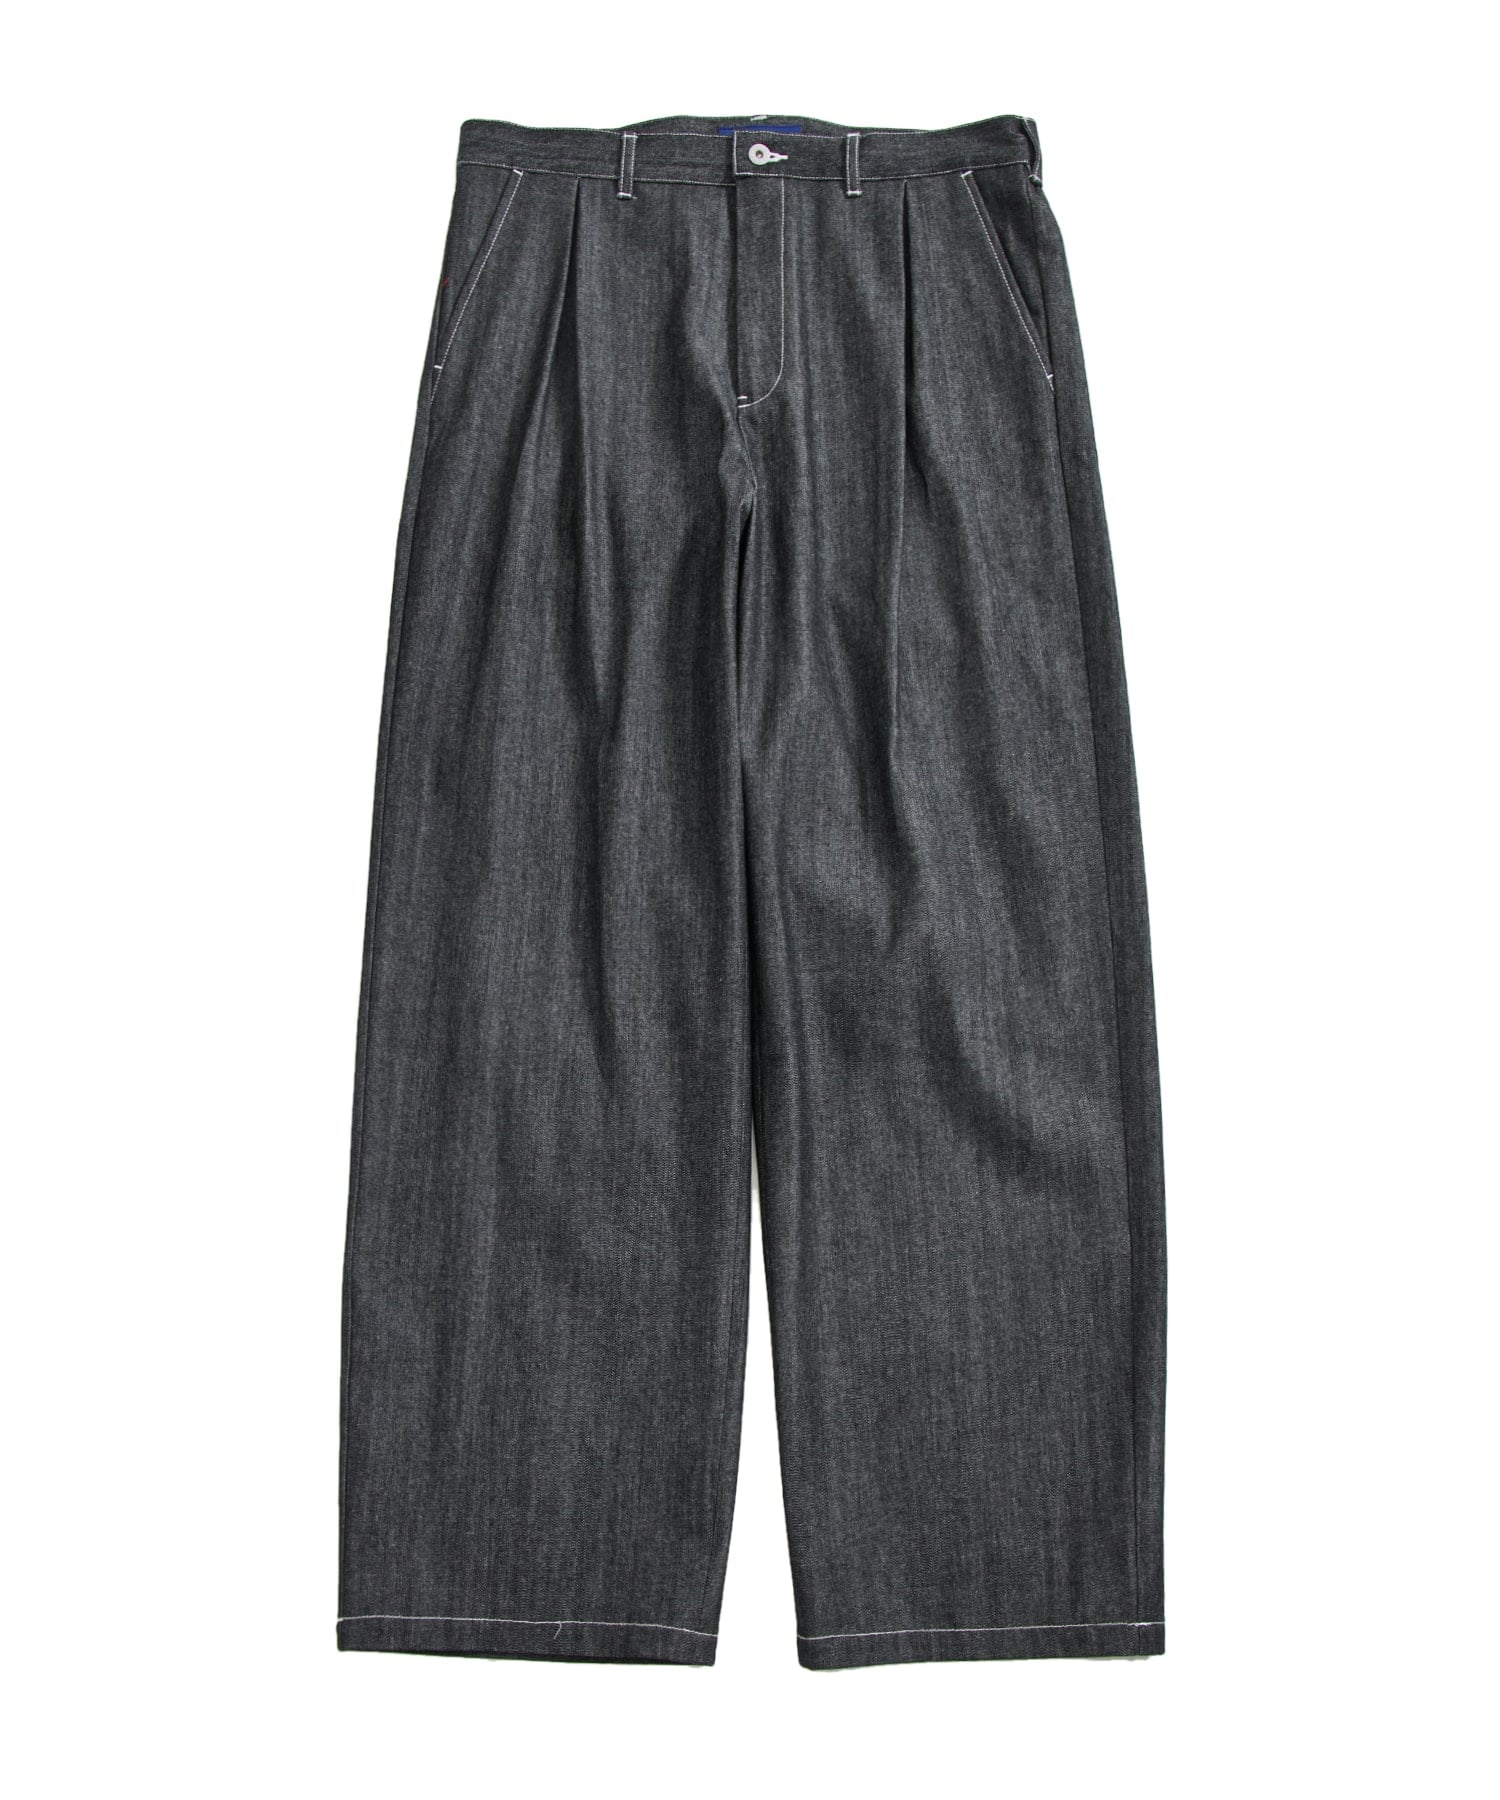 BOXTACK TROUSERS